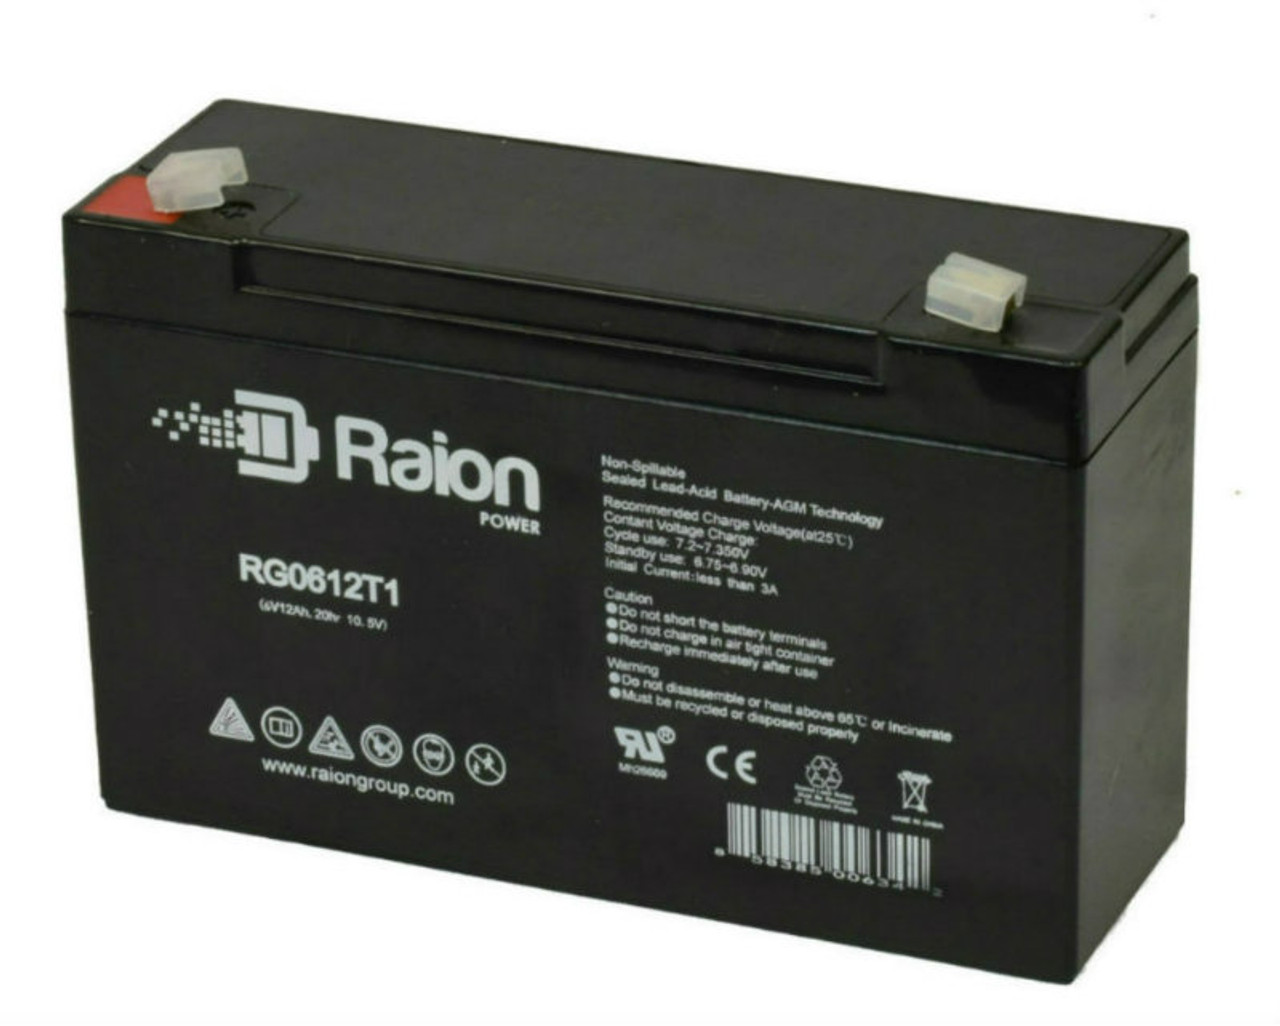 Raion Power RG06120T1 Replacement 6V 12Ah Emergency Light Battery for Sure-Lites SWV36